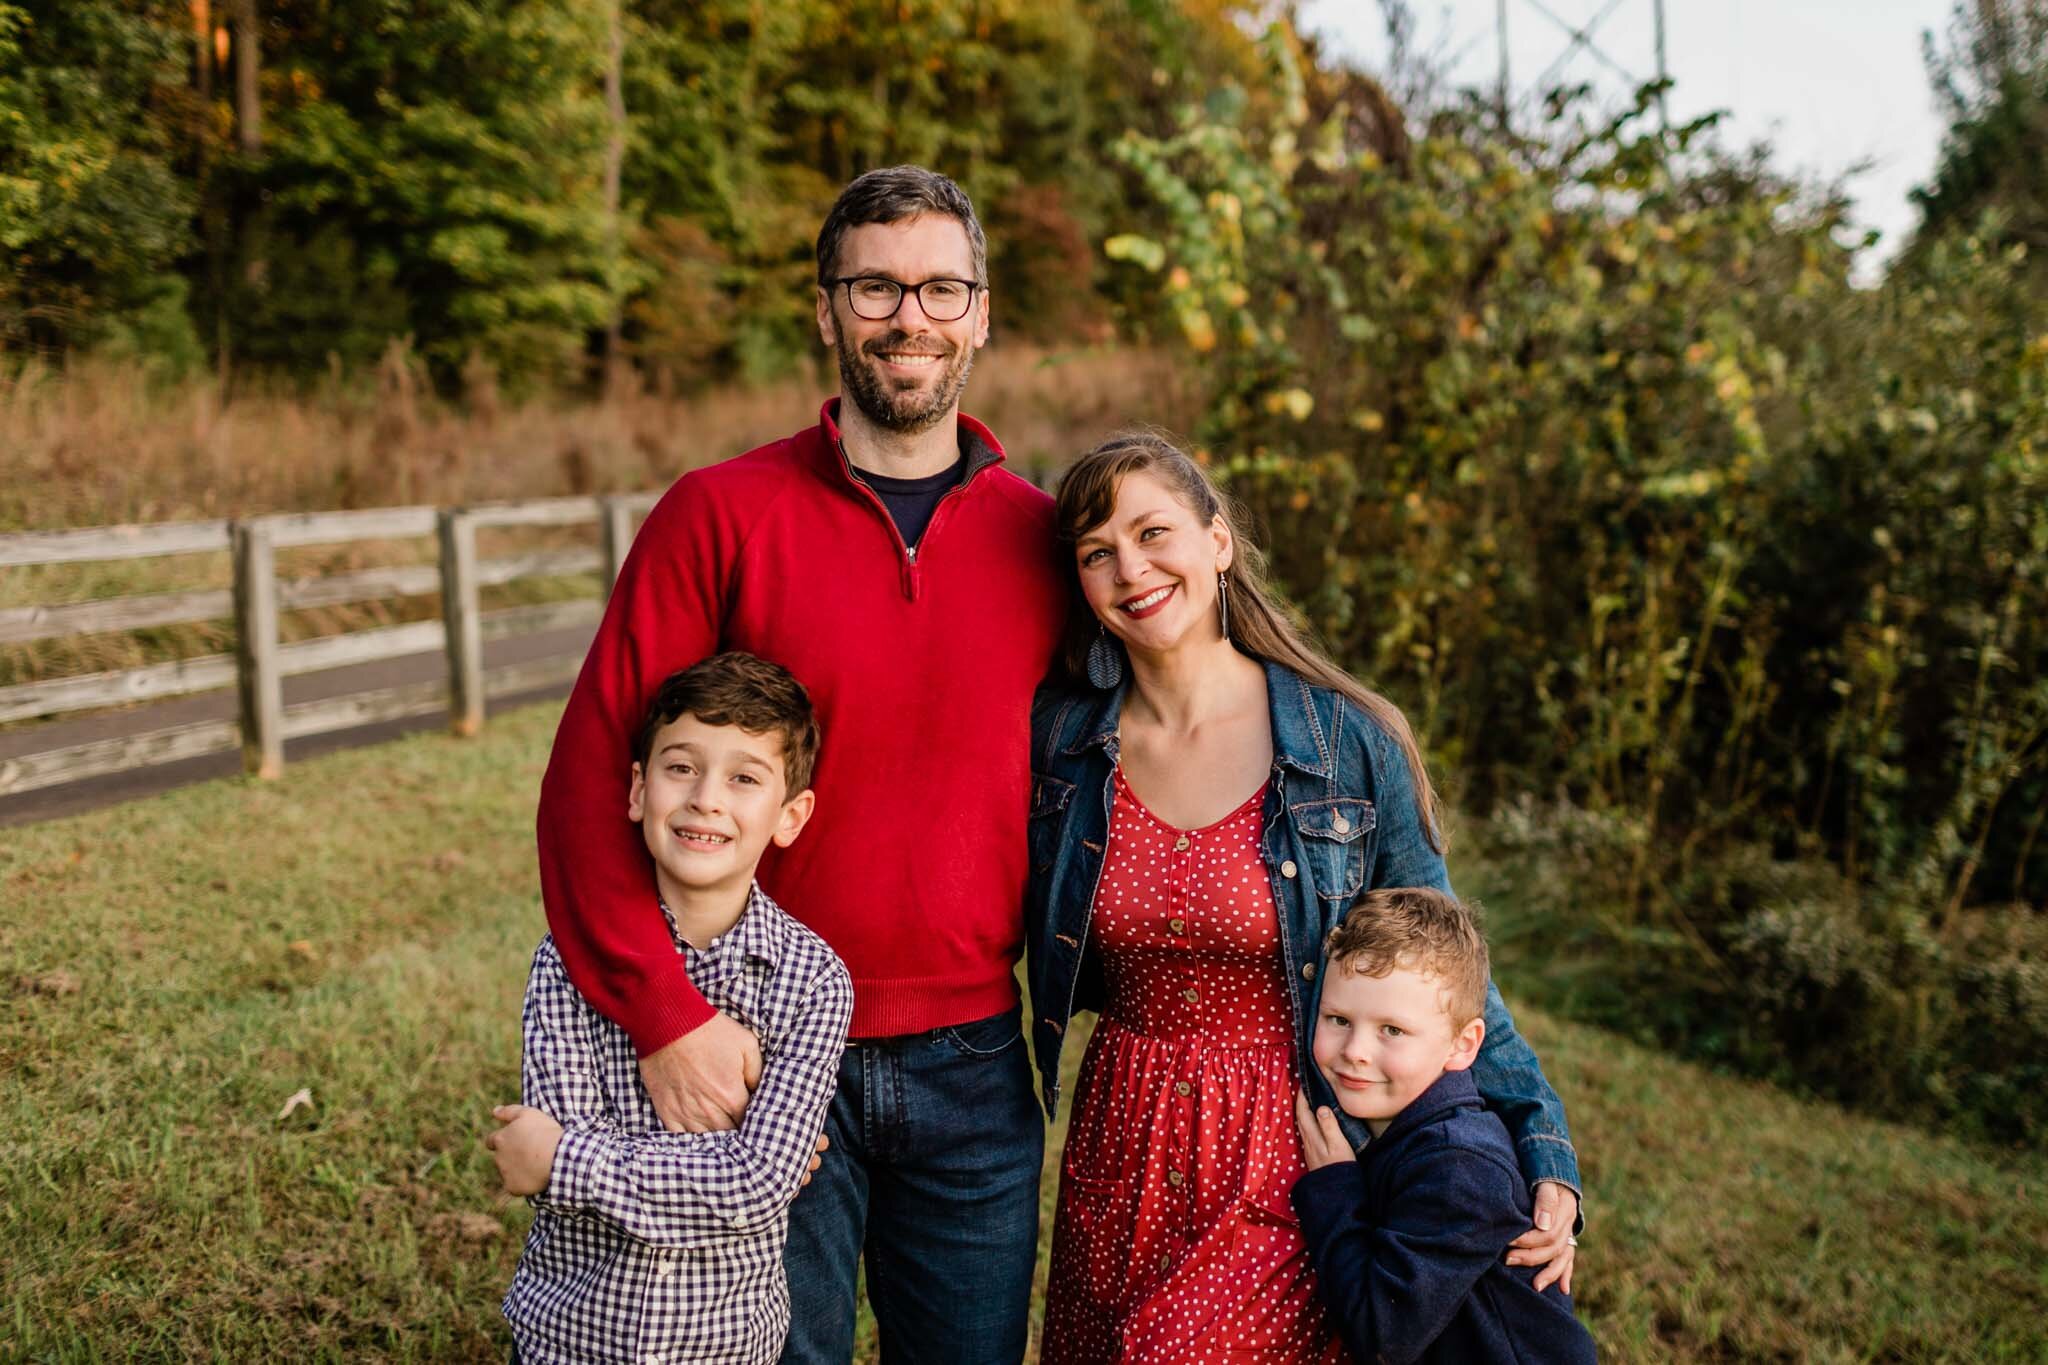 Raleigh Family Photographer | By G. Lin Photography | Umstead Park | Fall family portrait outside | Red and navy outfit